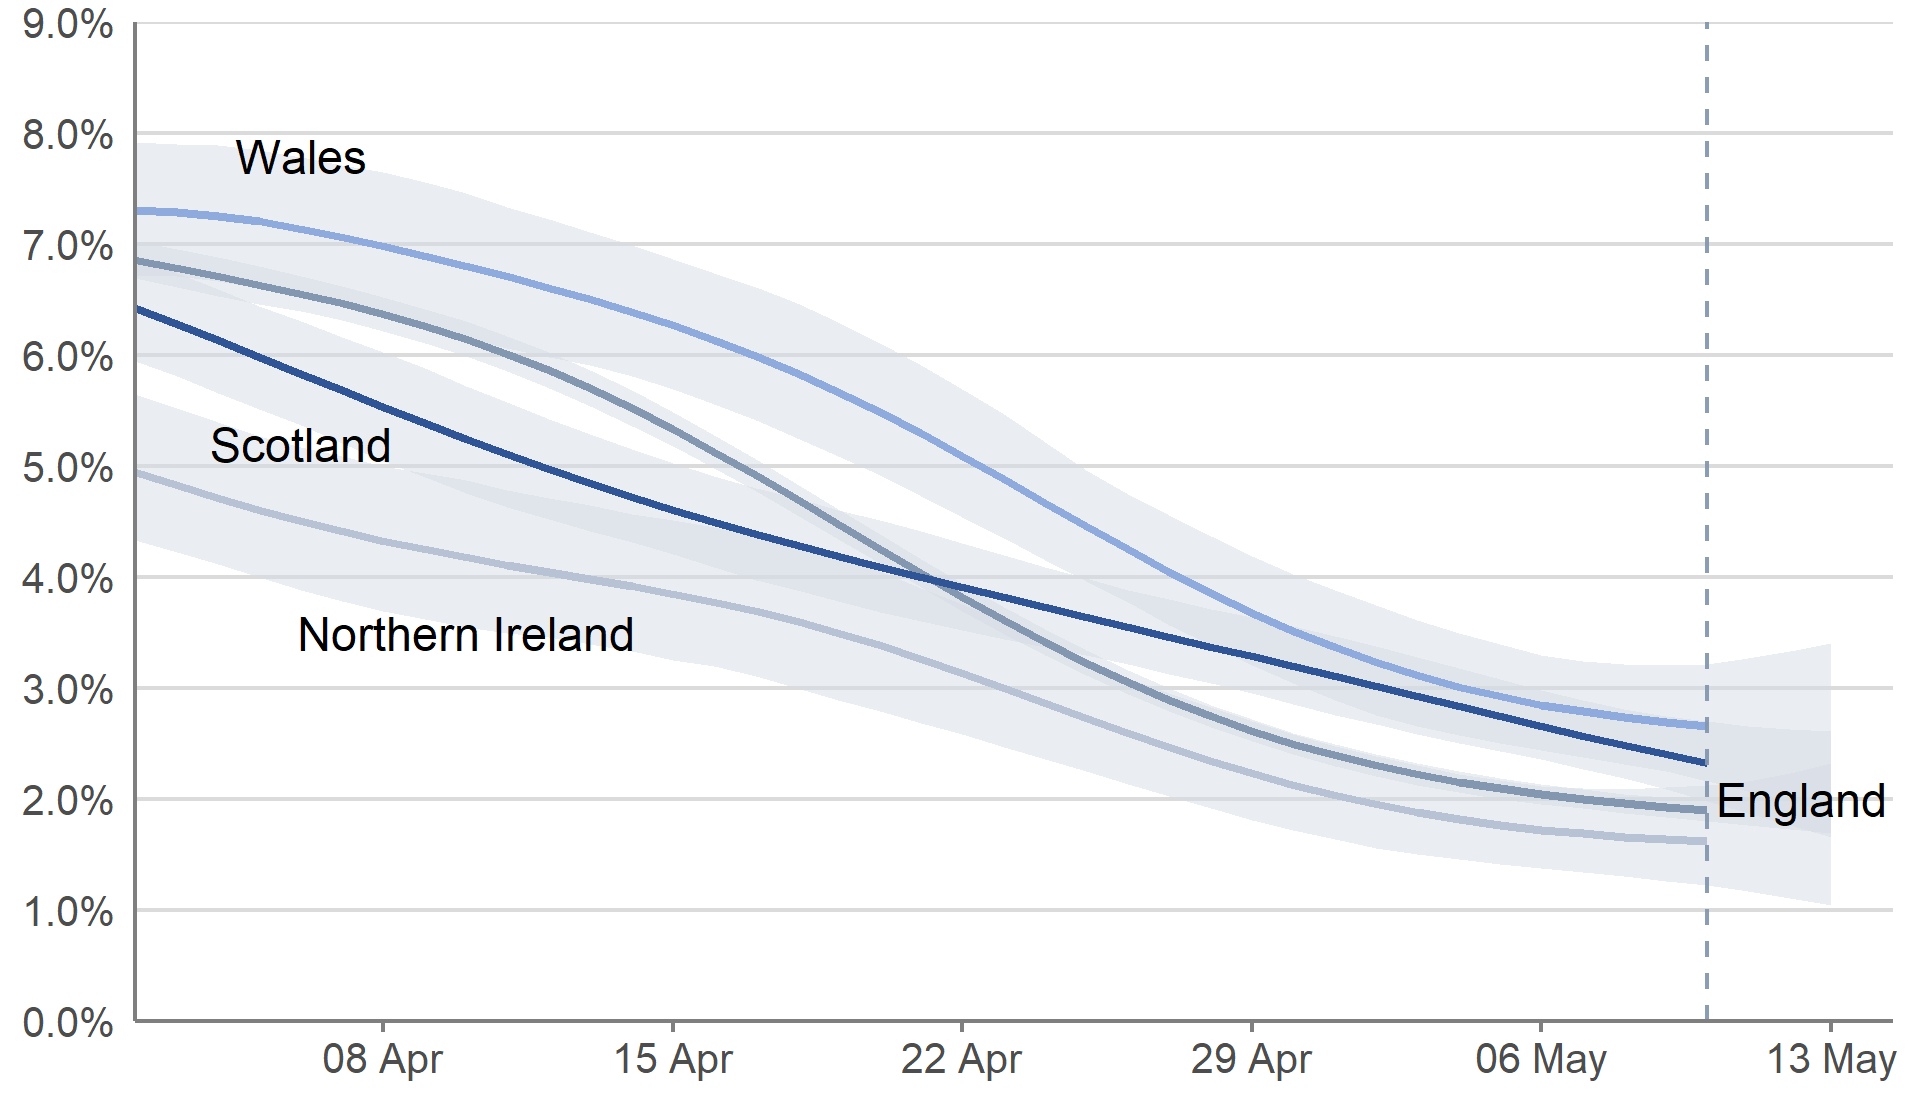 In the most recent week from 7 to 13 May 2022, the percentage of people testing positive for COVID-19 continued to decrease in England, Wales, Northern Ireland and Scotland.